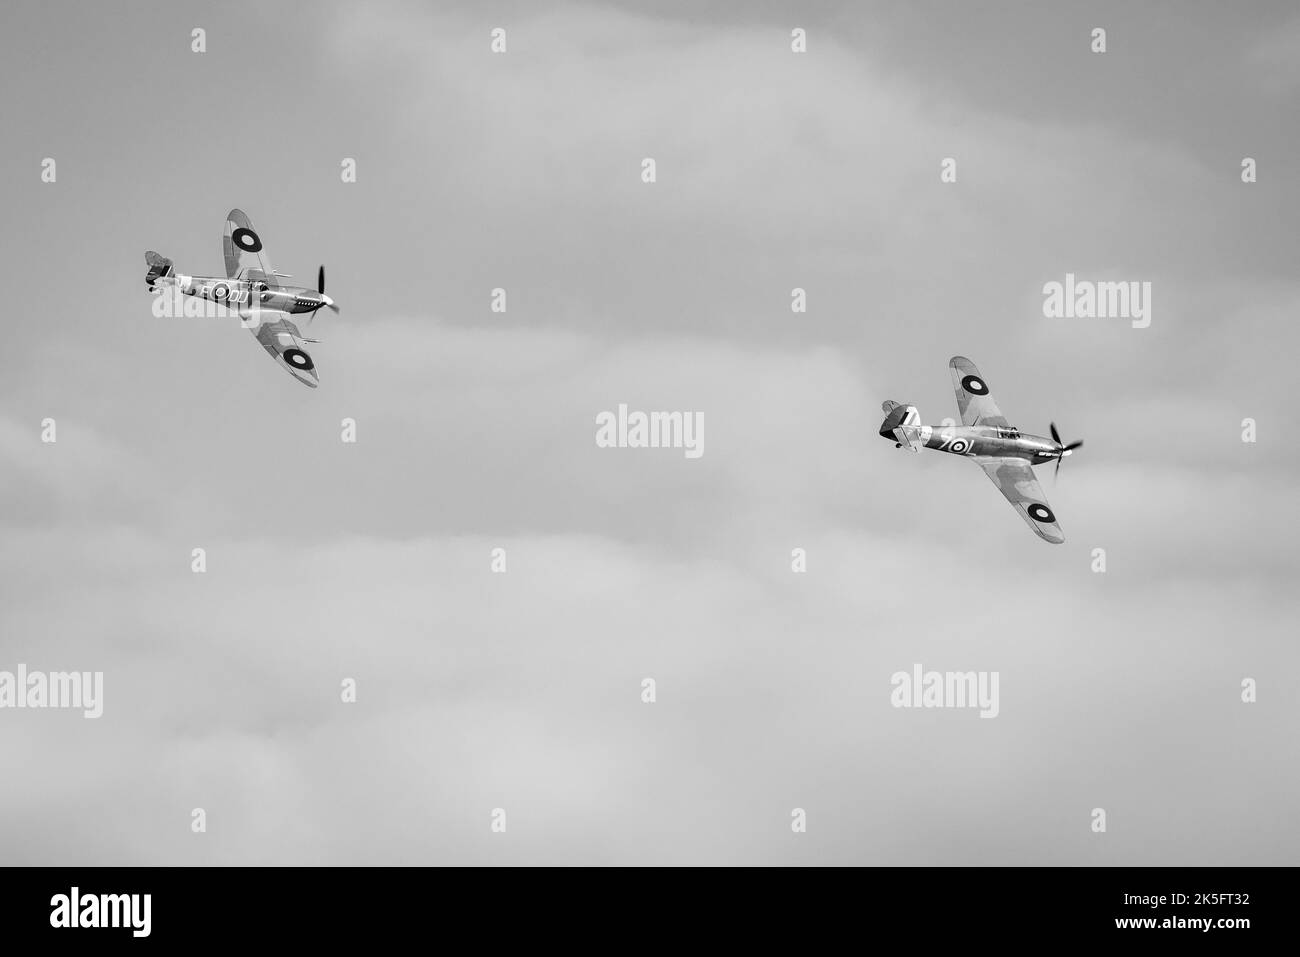 Supermarine Spitfire 'AR501' & Hawker Sea Hurricane “Z7015” flying in formation at the Race Day Airshow held at Shuttleworth on the 2nd October 2022 Stock Photo